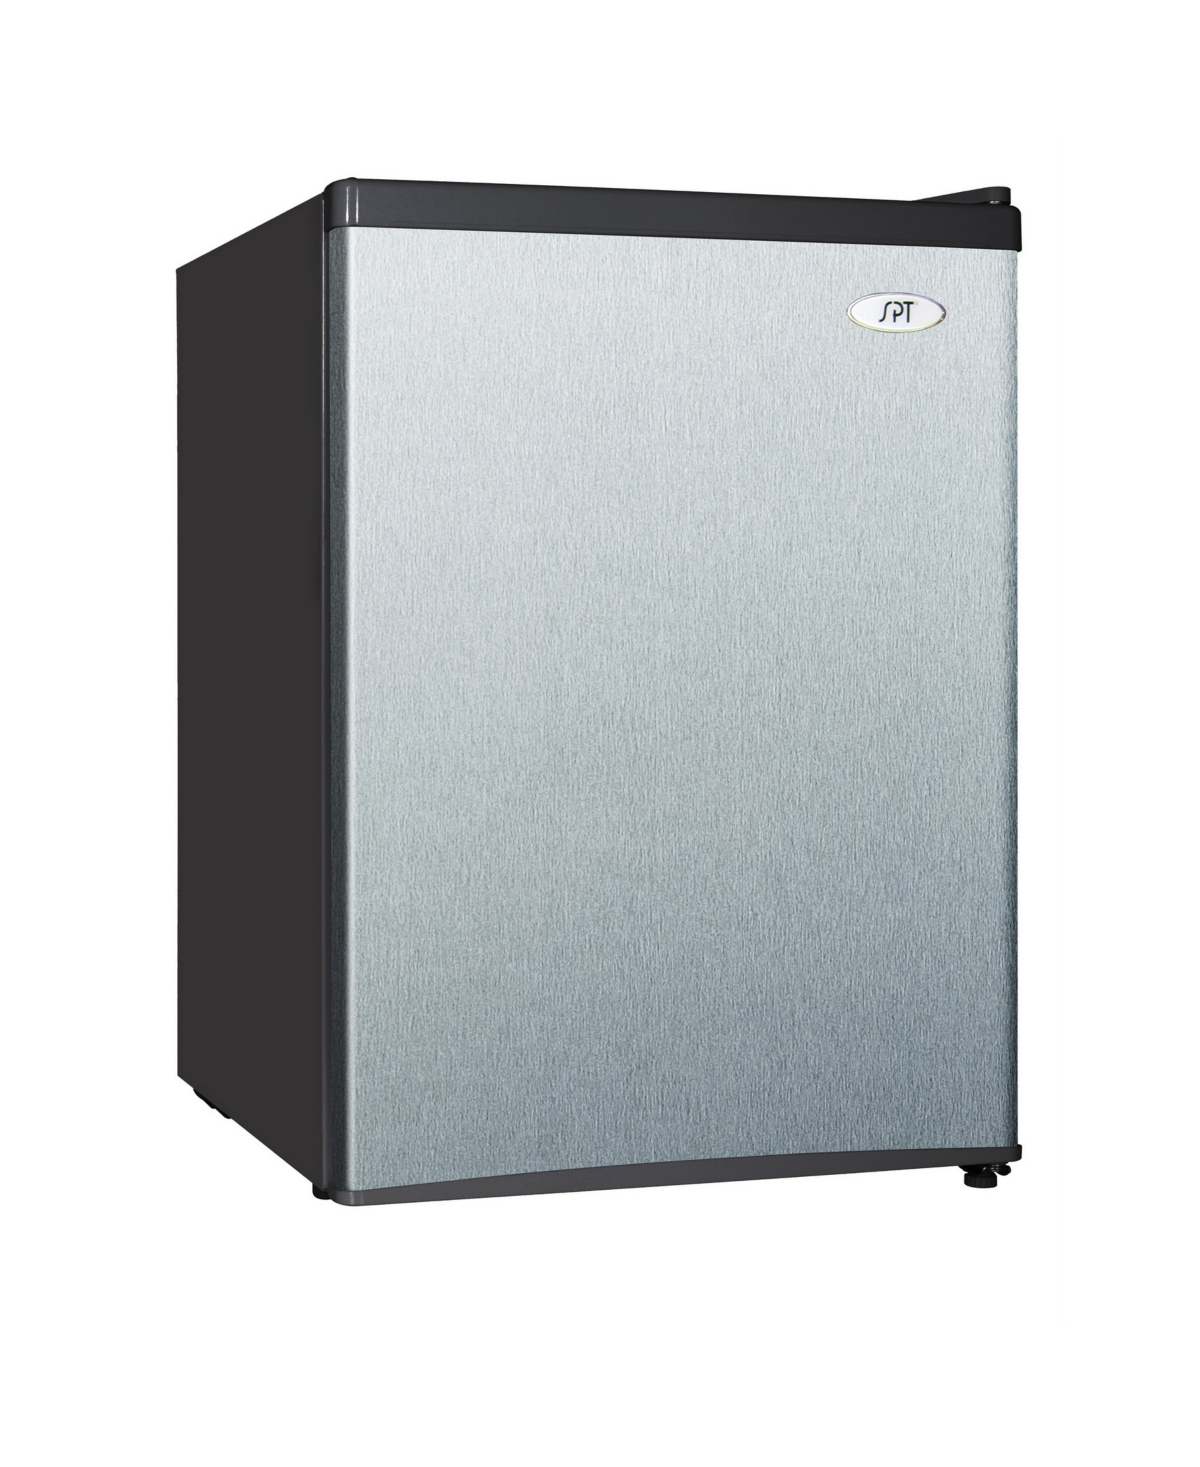 Spt 2.4 cubic feet Compact Refrigerator with Energy Star -...